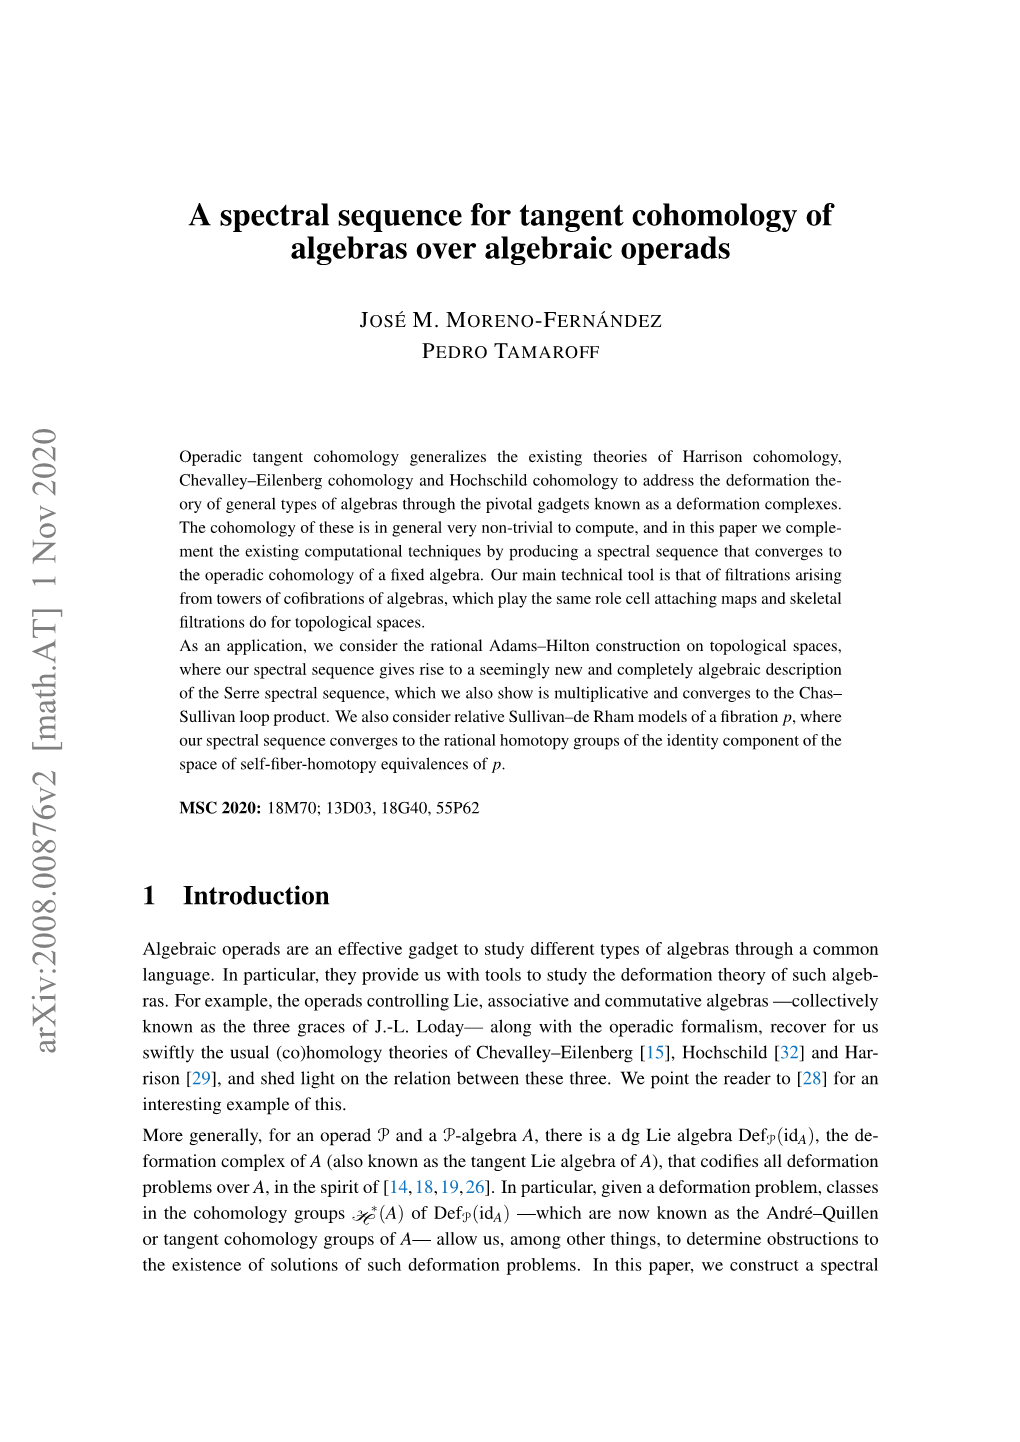 A Spectral Sequence for Tangent Cohomology of Algebras Over Algebraic Operads